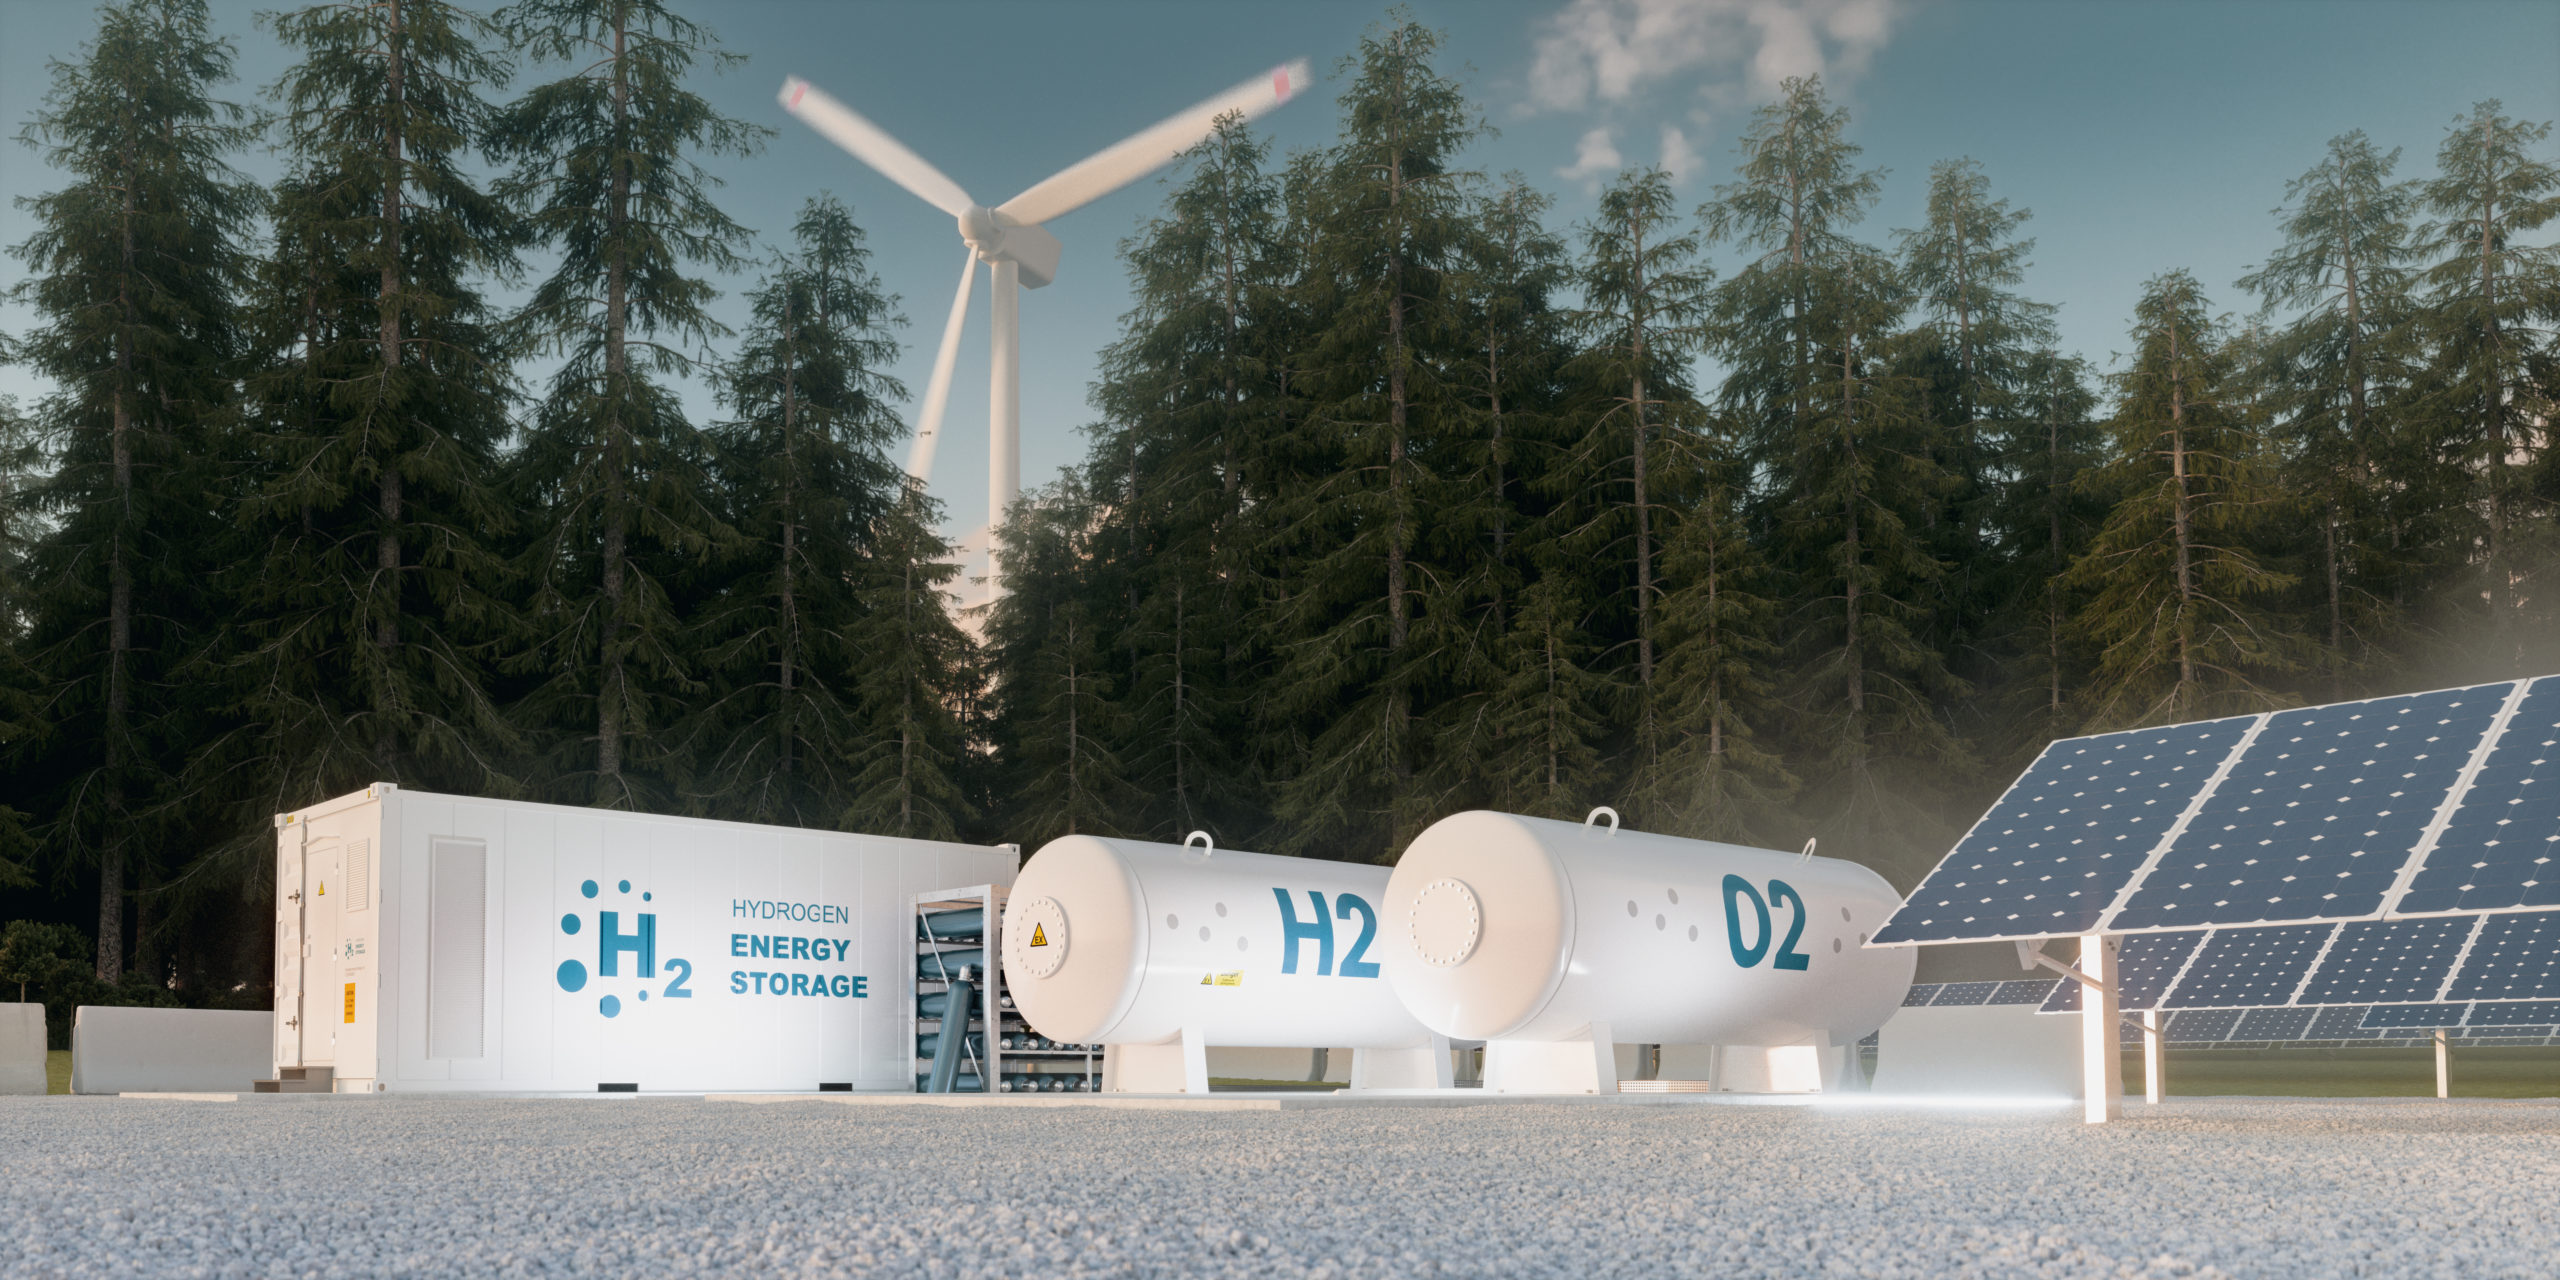 Concept of hydrogen energy storage from renewable sources - wind turbines and photovoltaics. 3d rendering